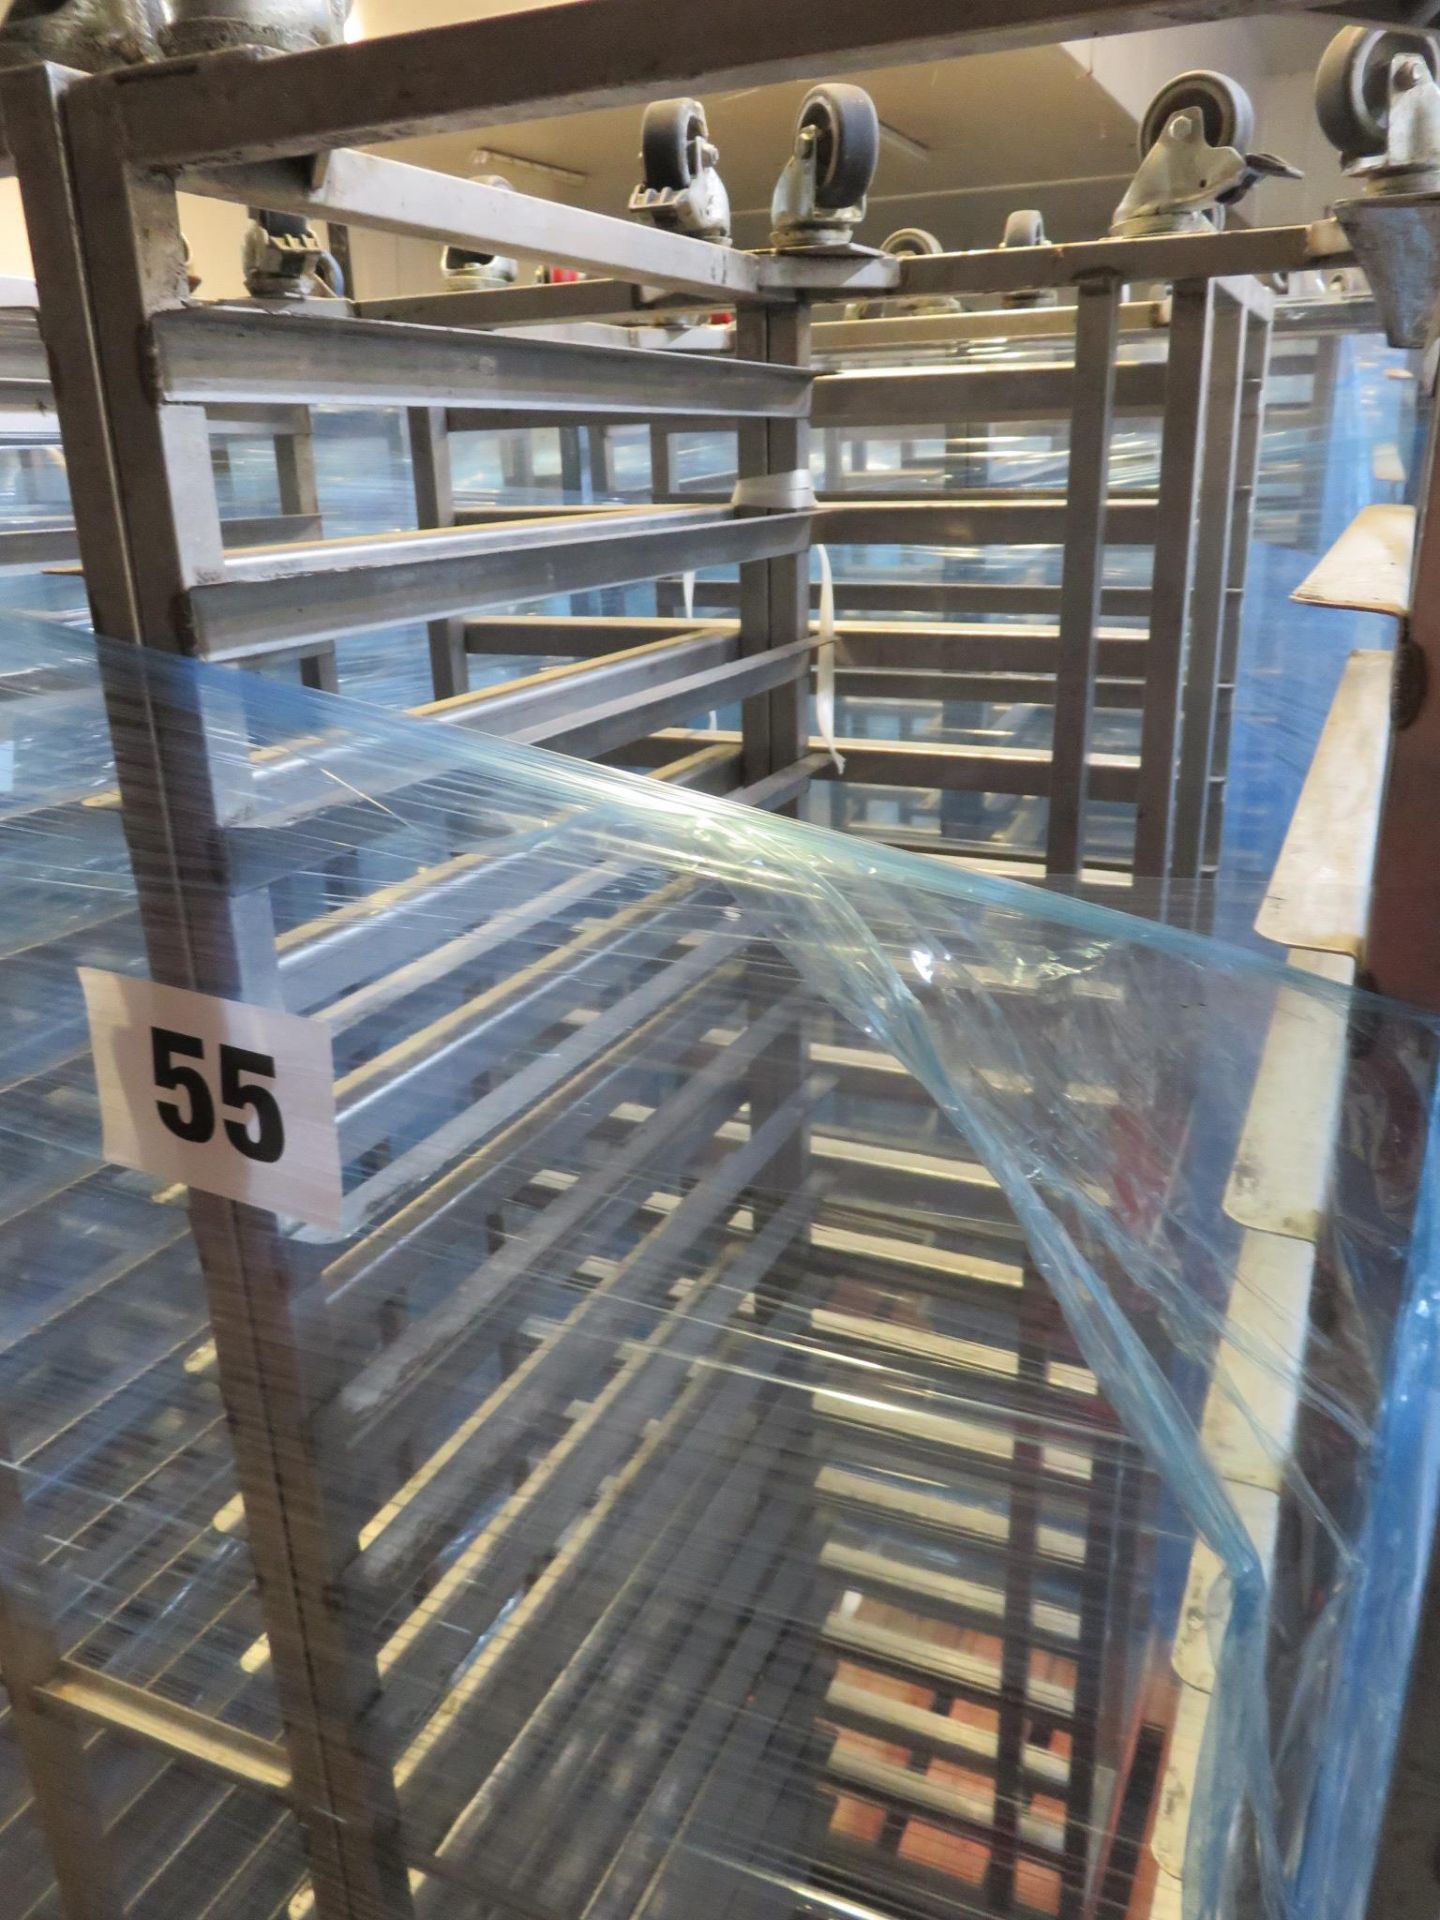 3 x S/s Racks capable of taking 16 trays. Approx.430 x 650 x 1800mm high. Mobile. LO £30 - Image 2 of 2